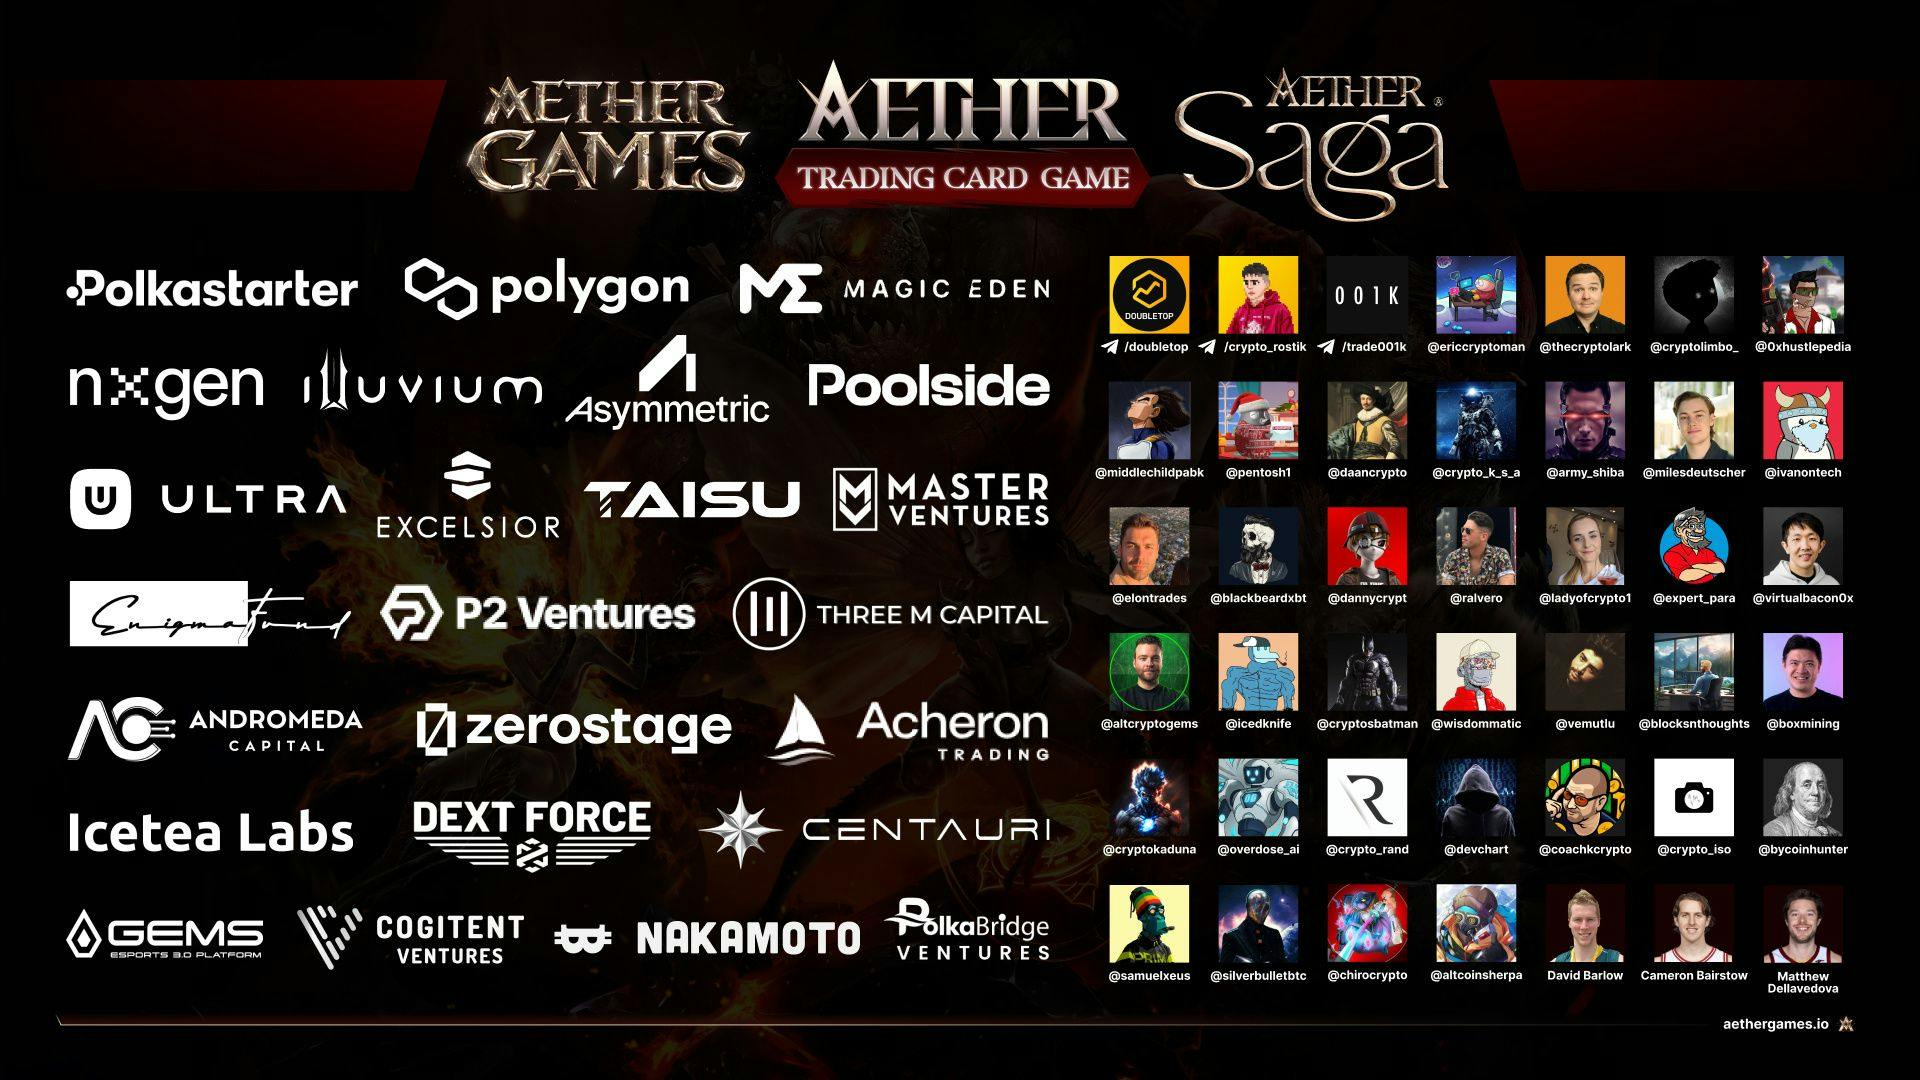 Aether Games Image #7